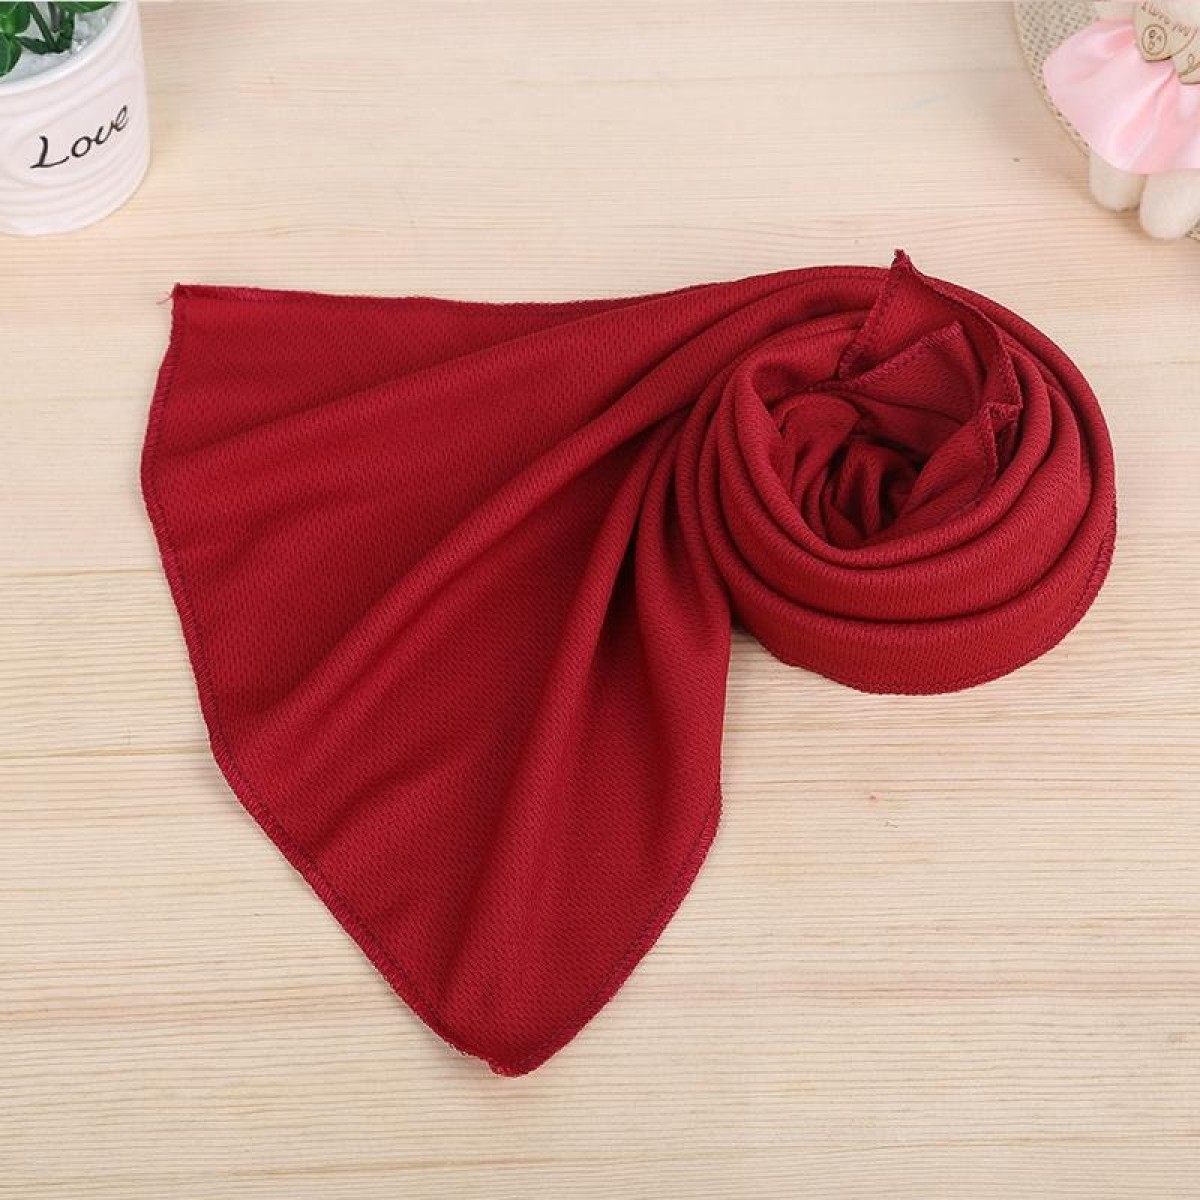 Outdoor Sports Portable Cold Feeling Prevent Heatstroke Ice Towel, Size: 30*80cm(Red)